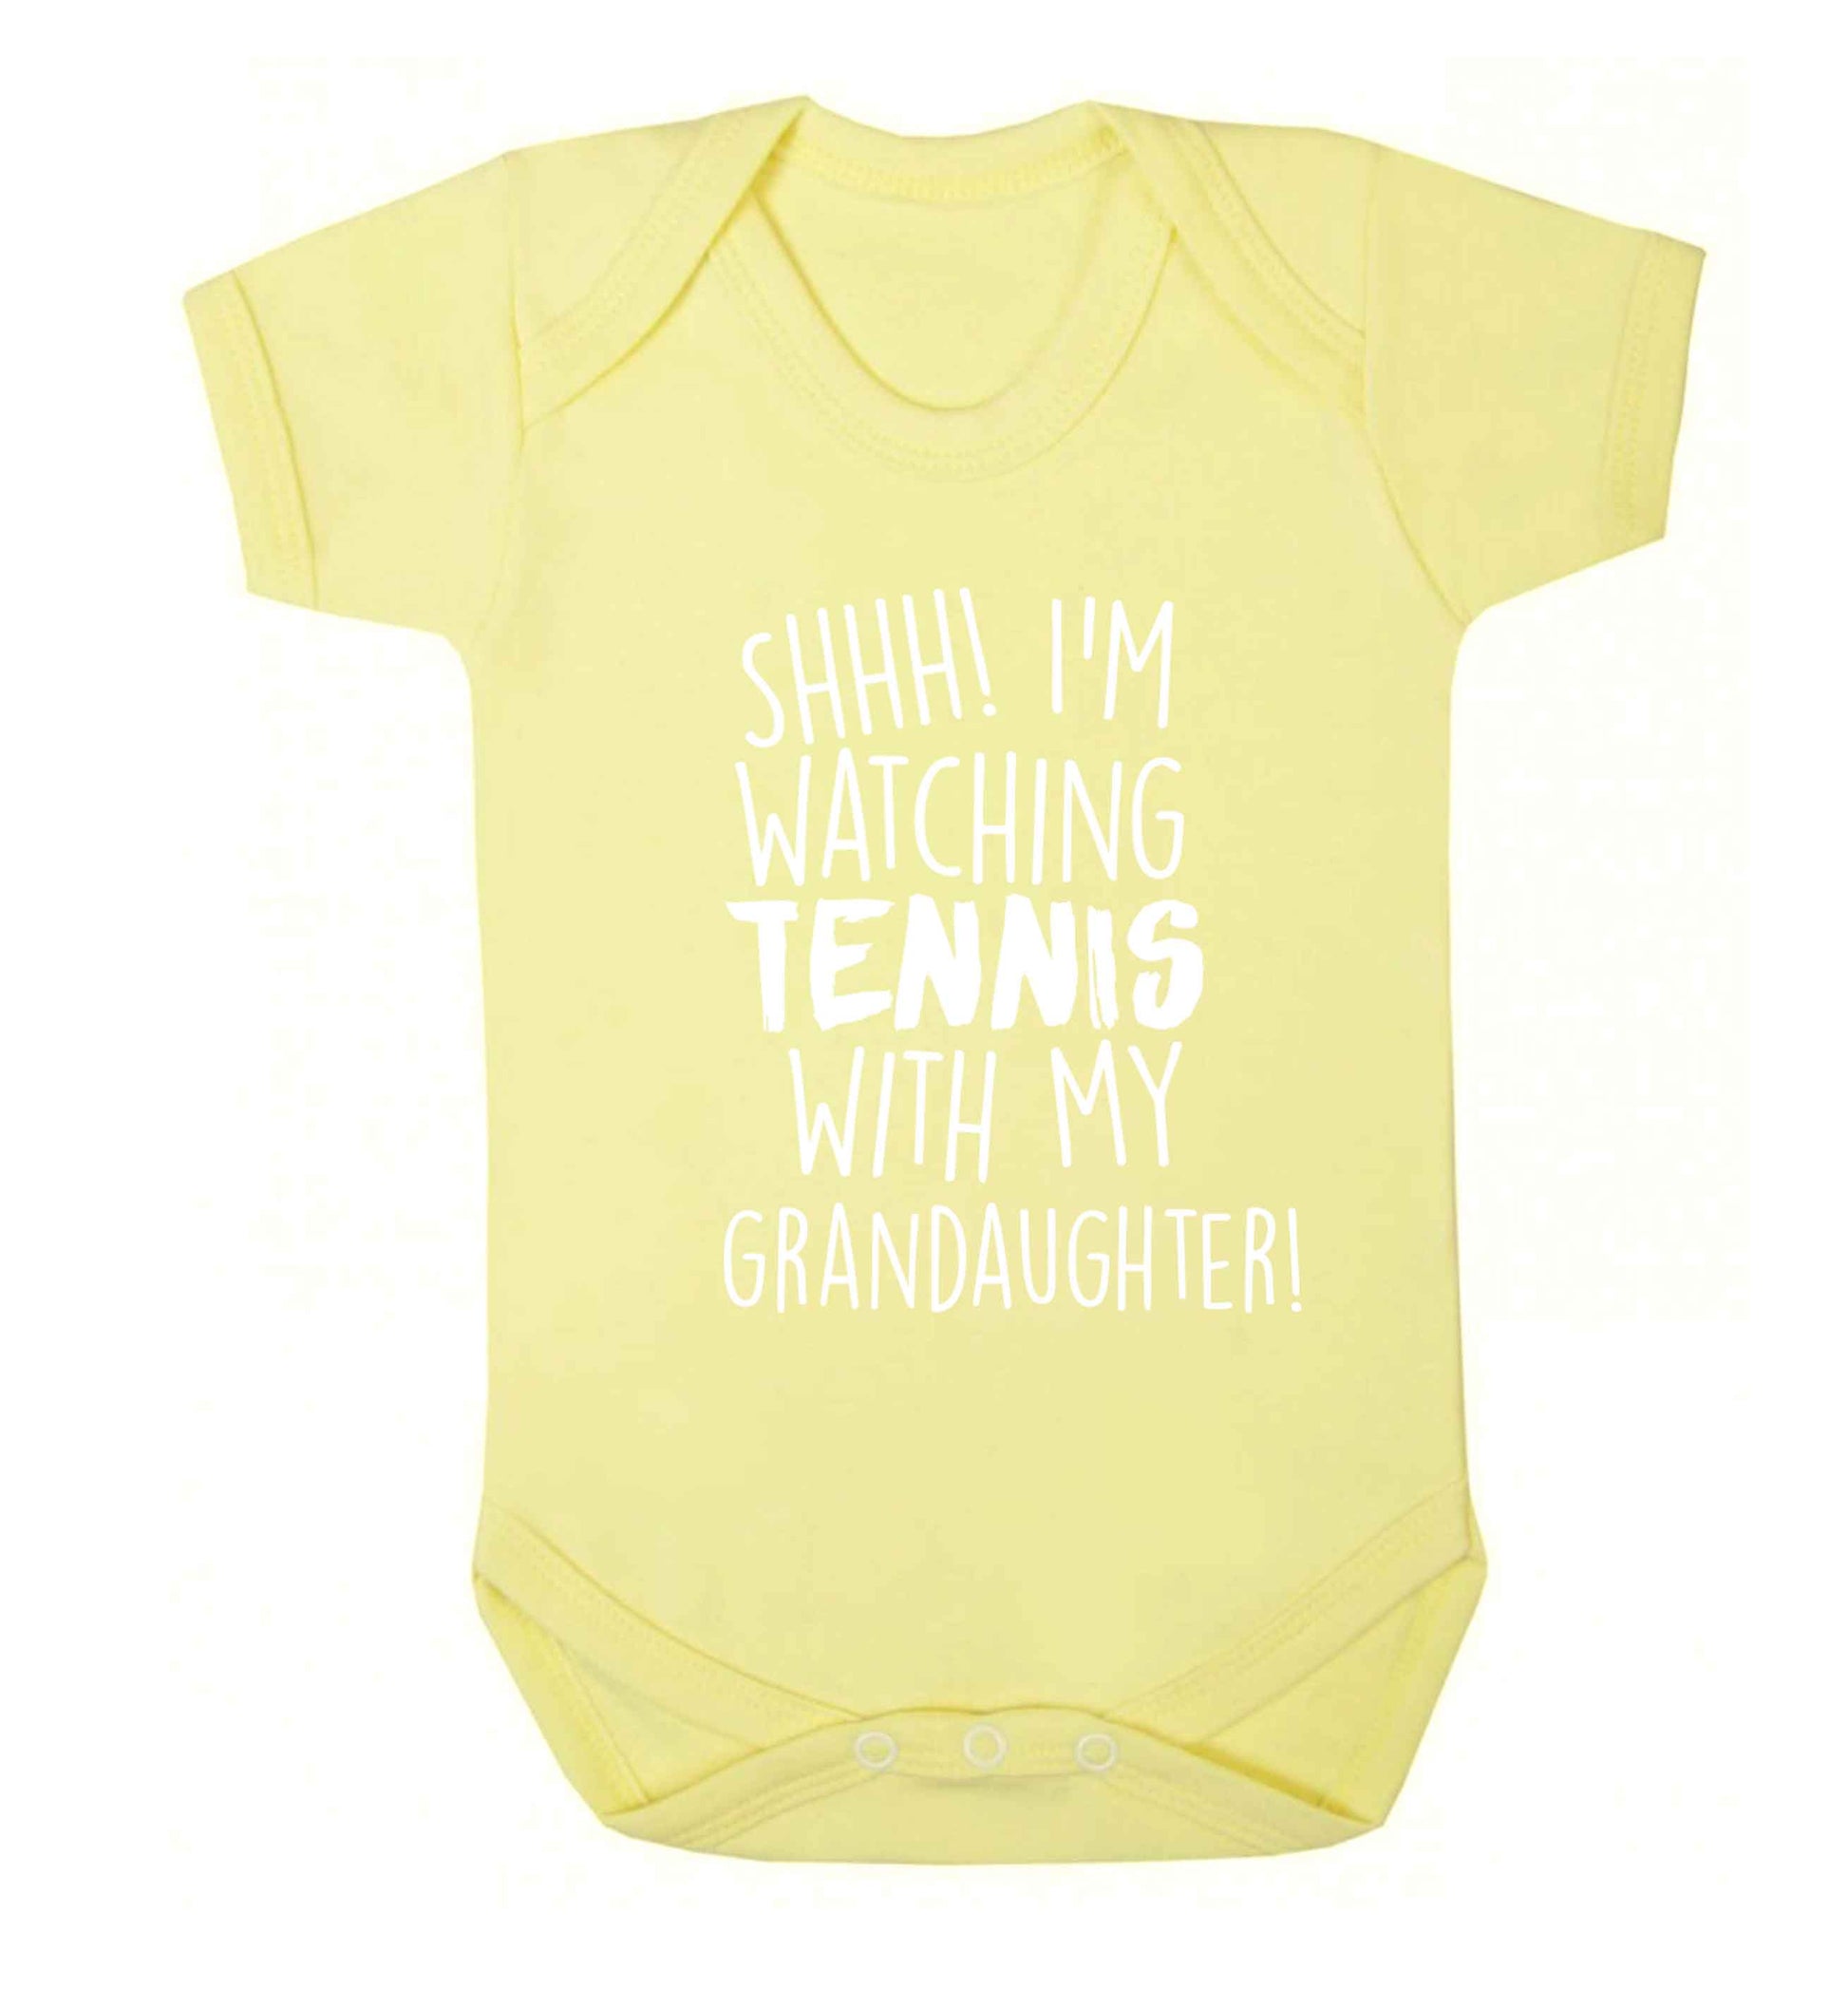 Shh! I'm watching tennis with my granddaughter! Baby Vest pale yellow 18-24 months